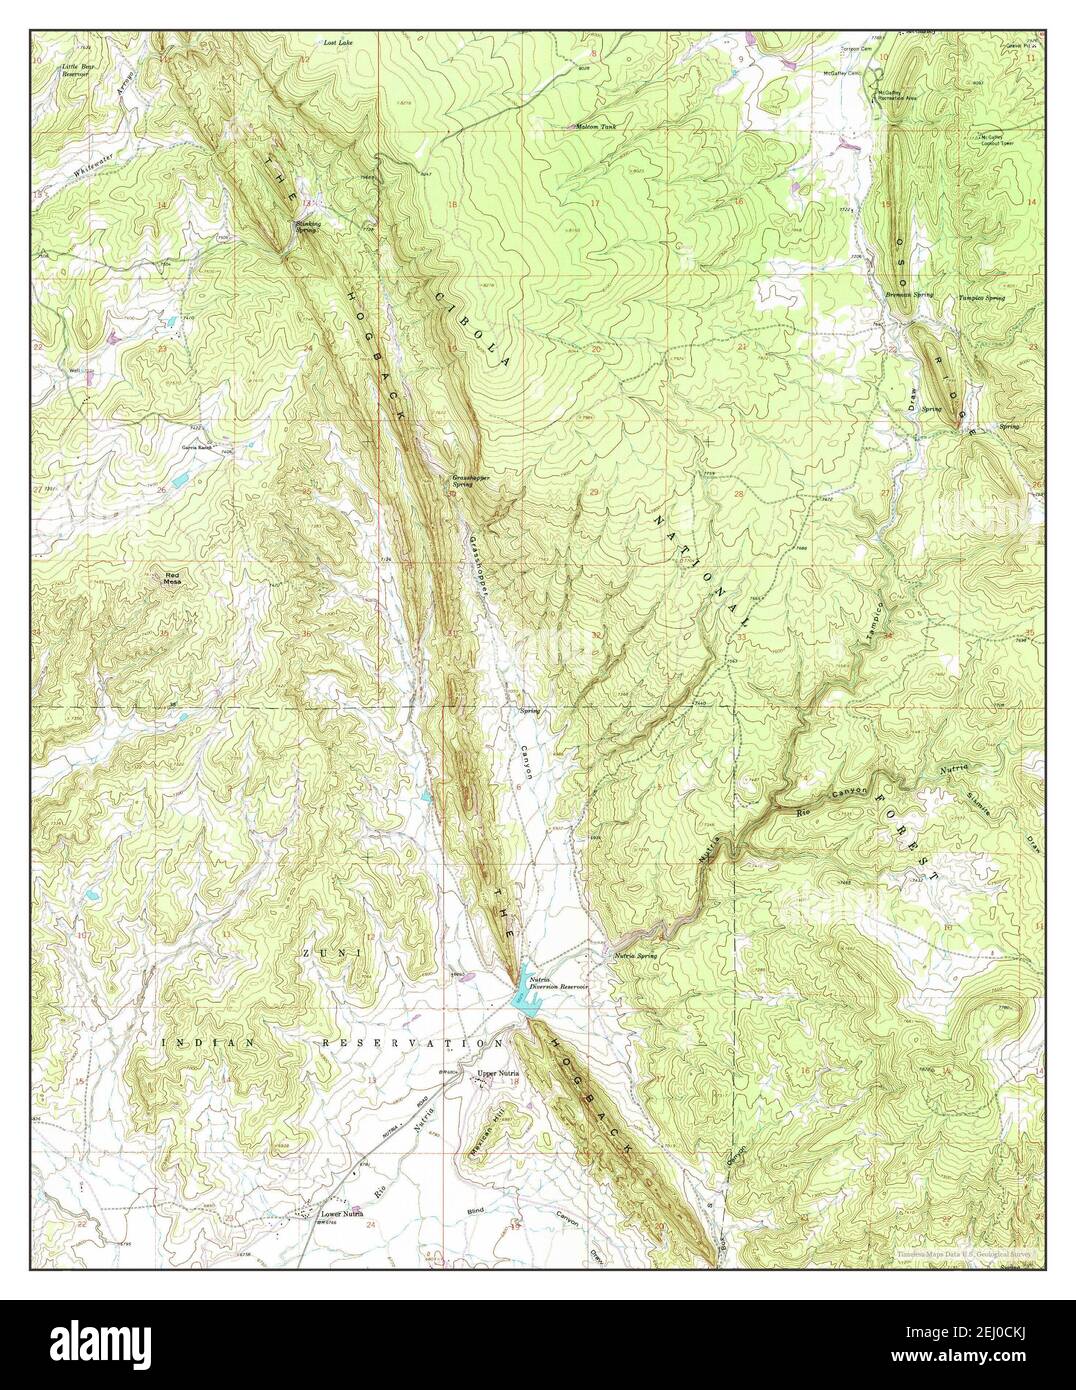 Upper Nutria, New Mexico, map 1963, 1:24000, United States of America by Timeless Maps, data U.S. Geological Survey Foto Stock